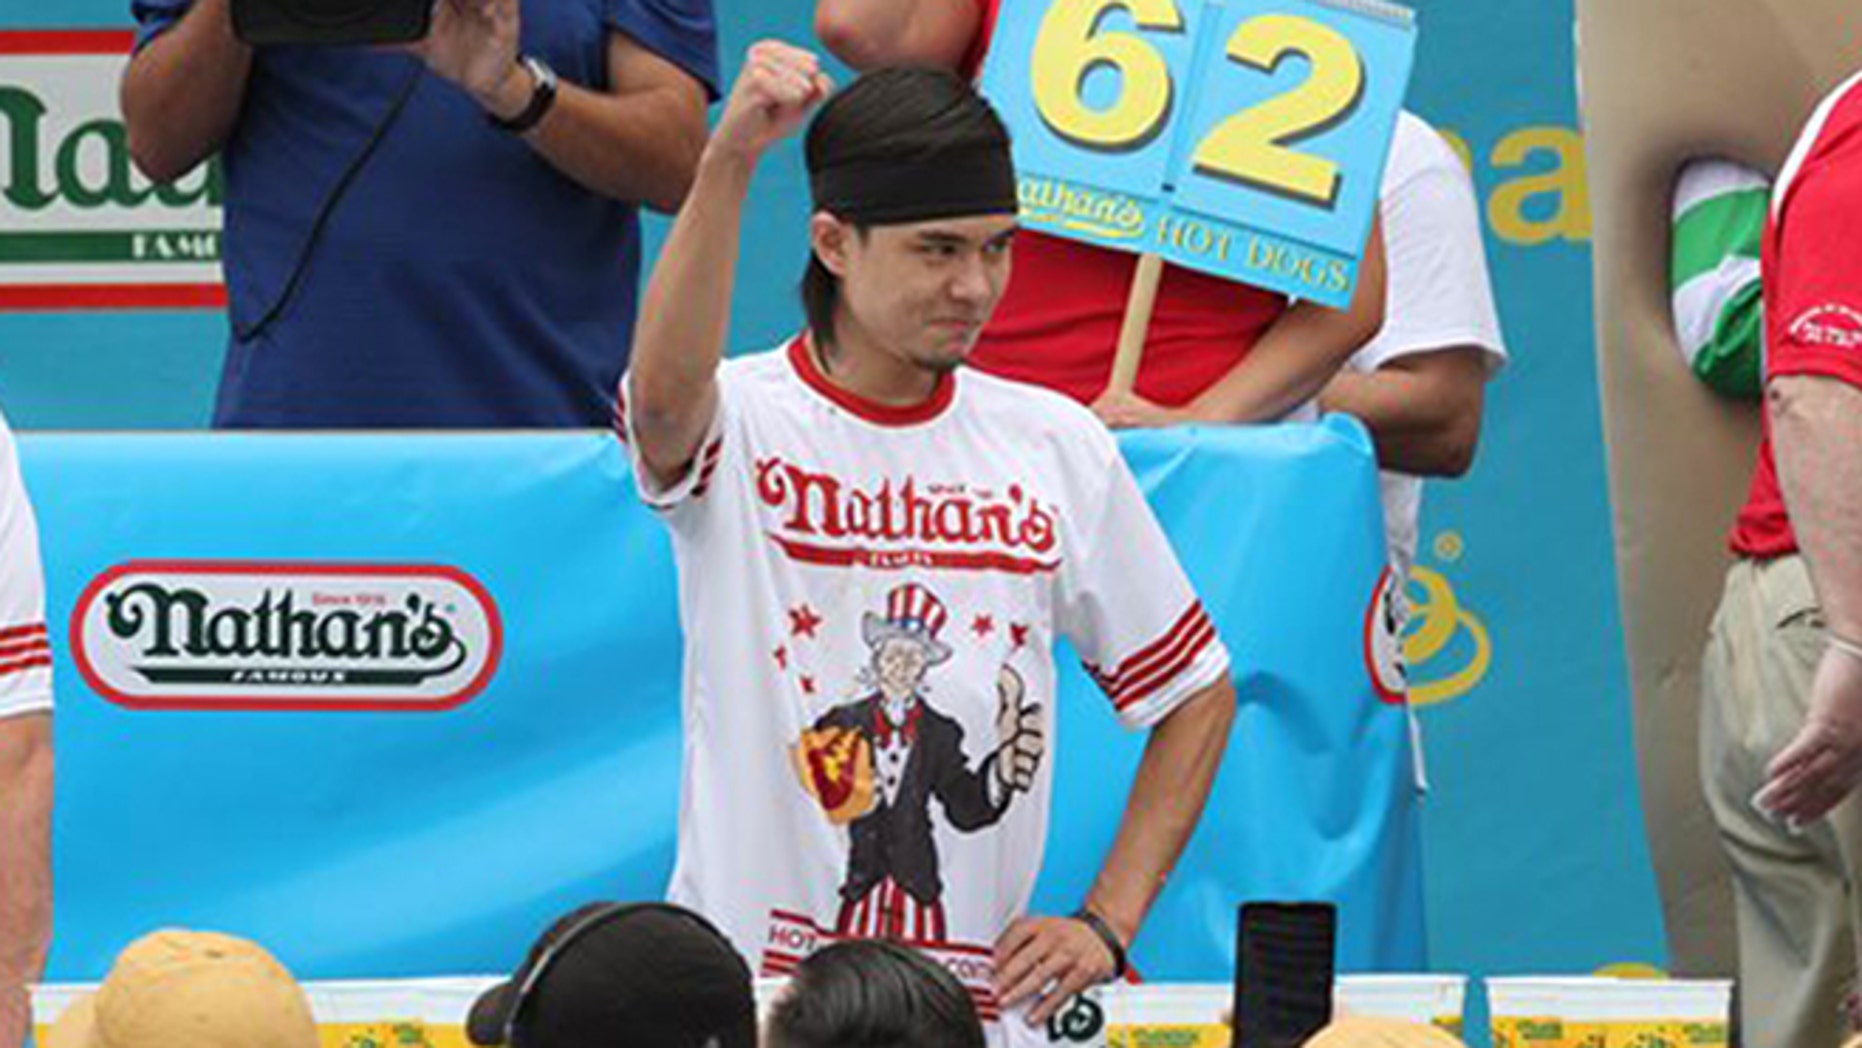 Matt Stonie tops Joey Chestnut in annual Nathan's hot dog eating